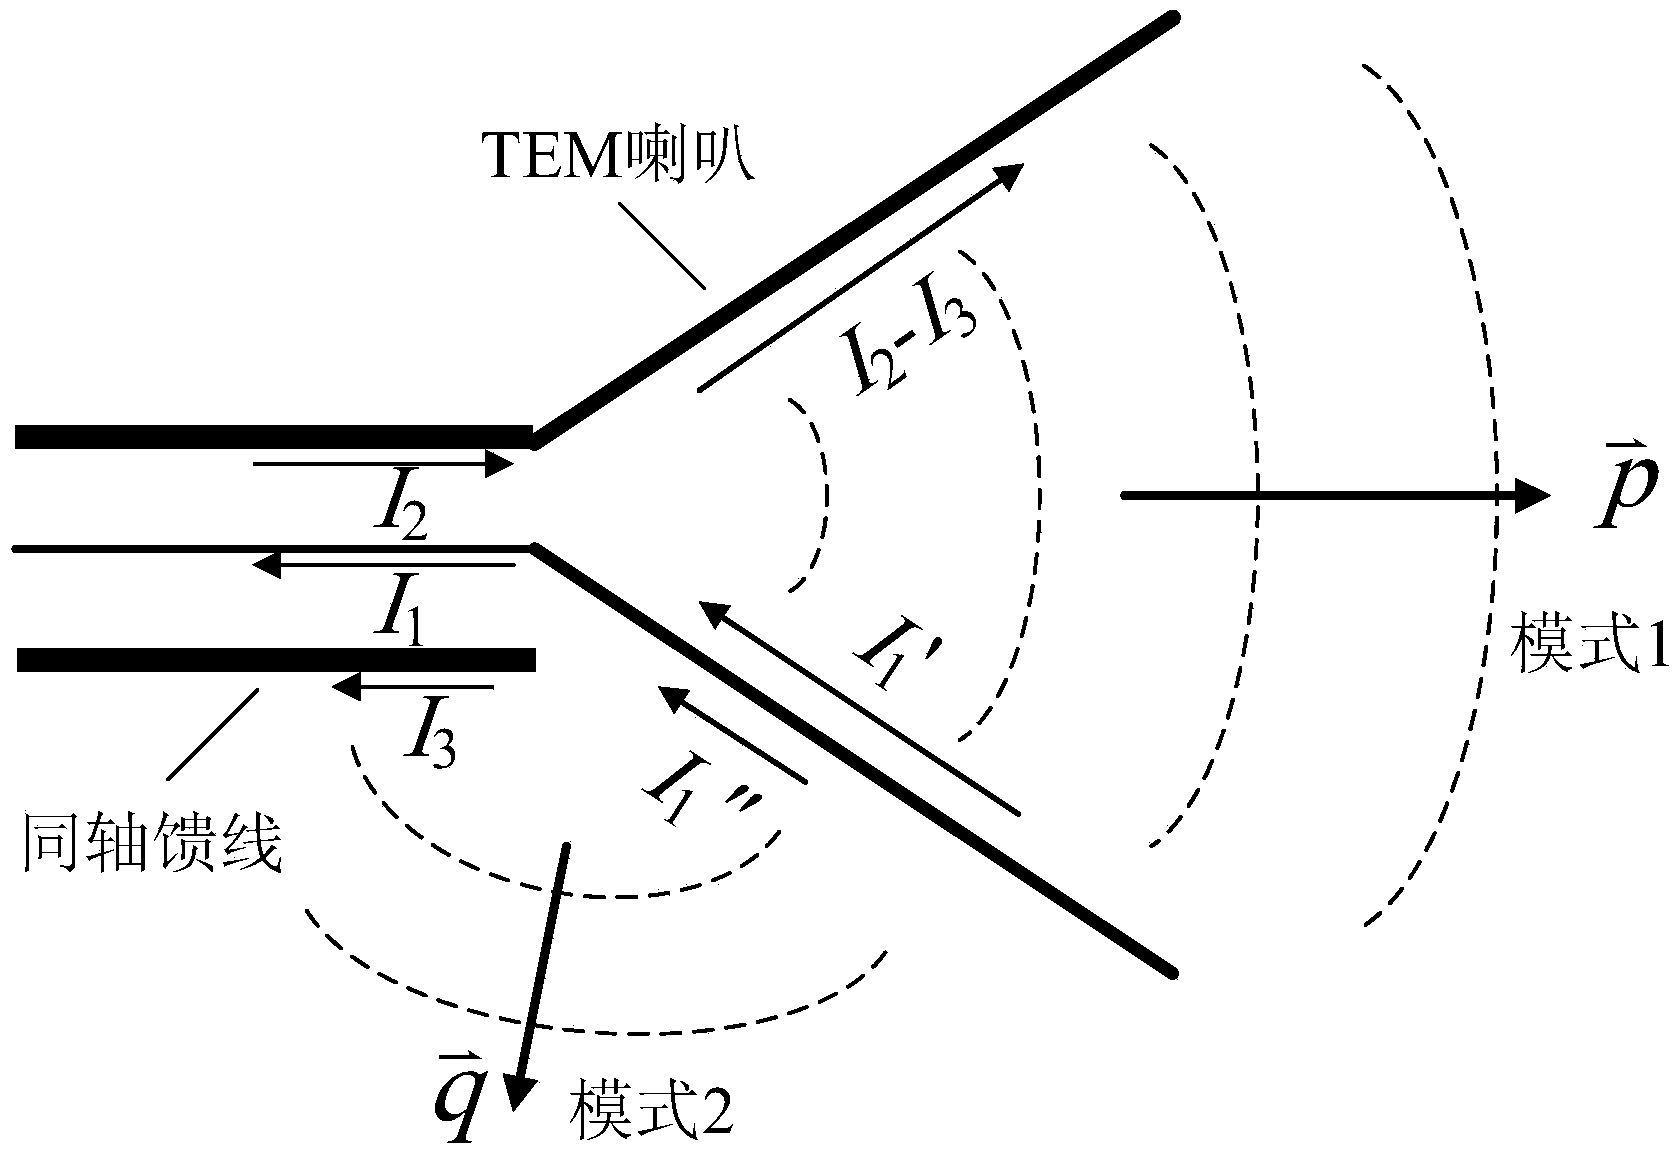 Receiving antenna for high-power microwave radiation field measuring system